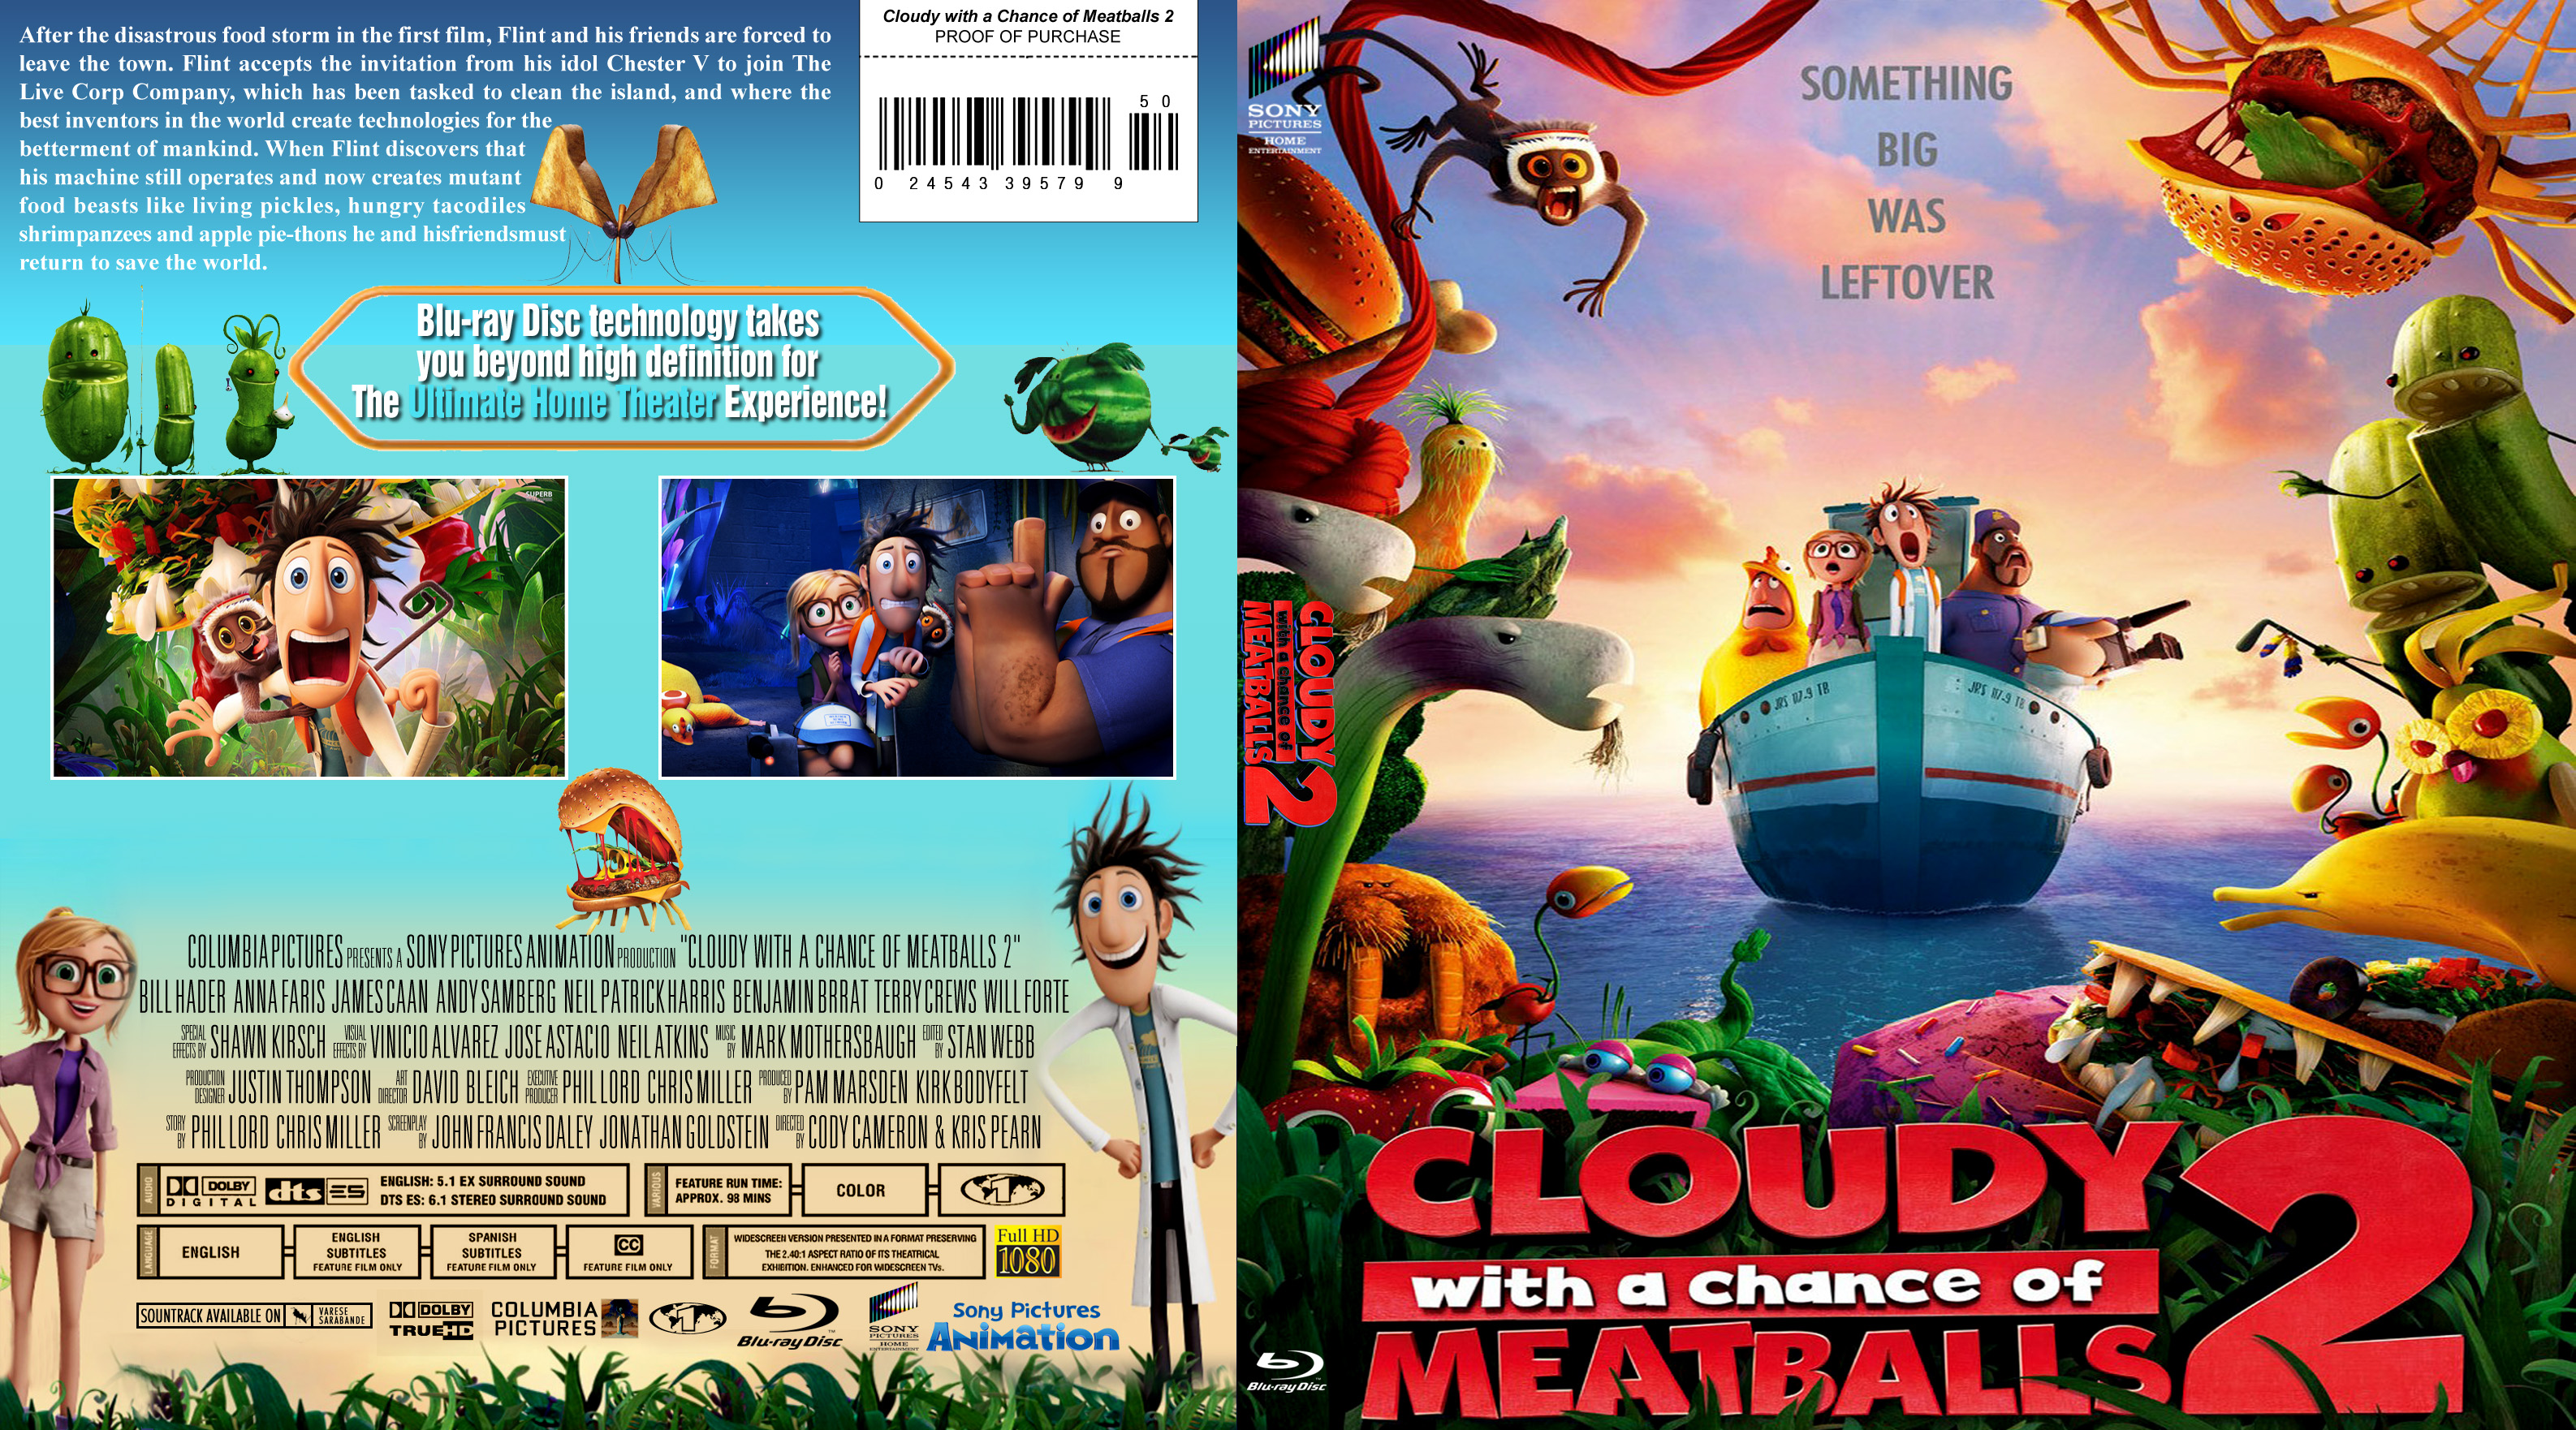 Cloudy With A Chance Of Meatballs 2 (2013) Blu-ray - front.